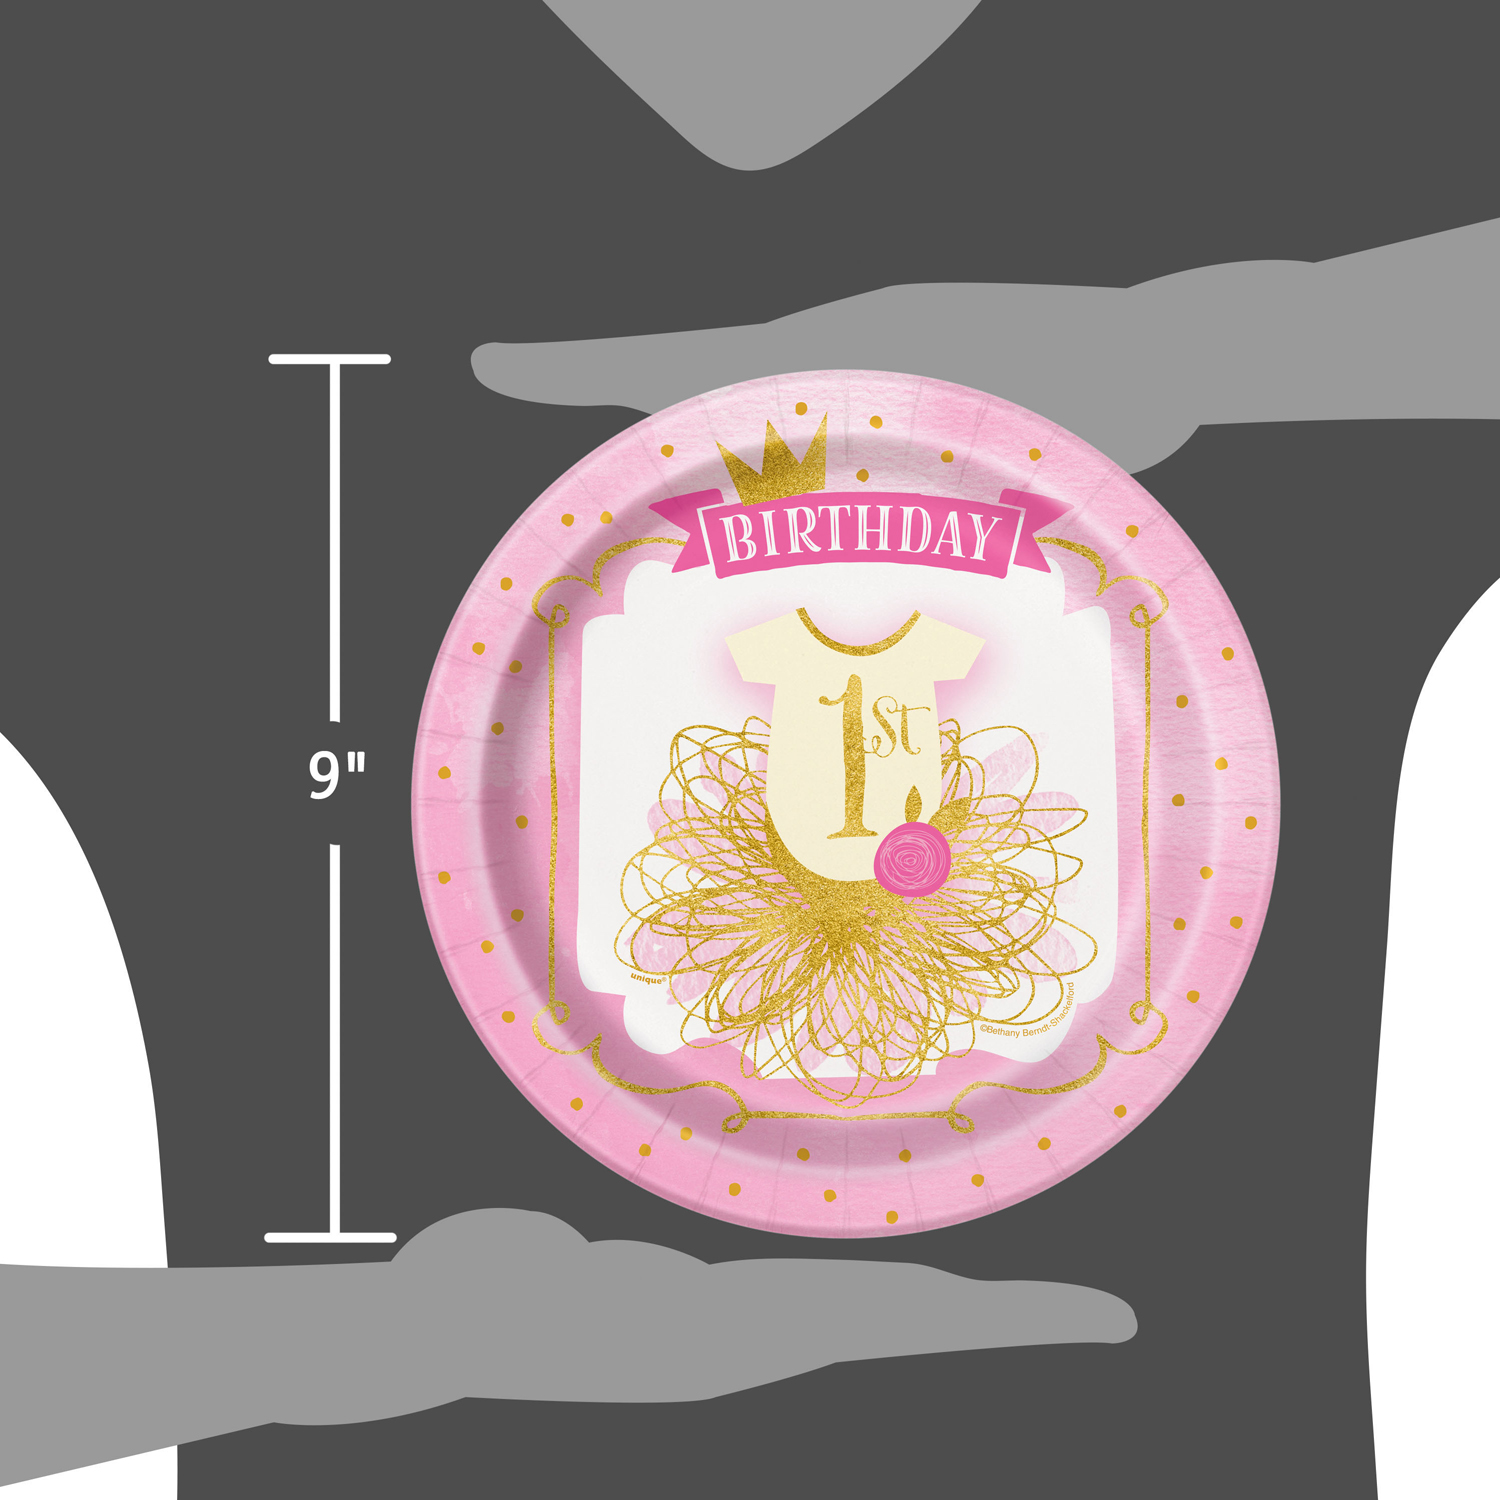 9" Pink and Gold Girls First Birthday Party Plates, 8ct - image 2 of 4